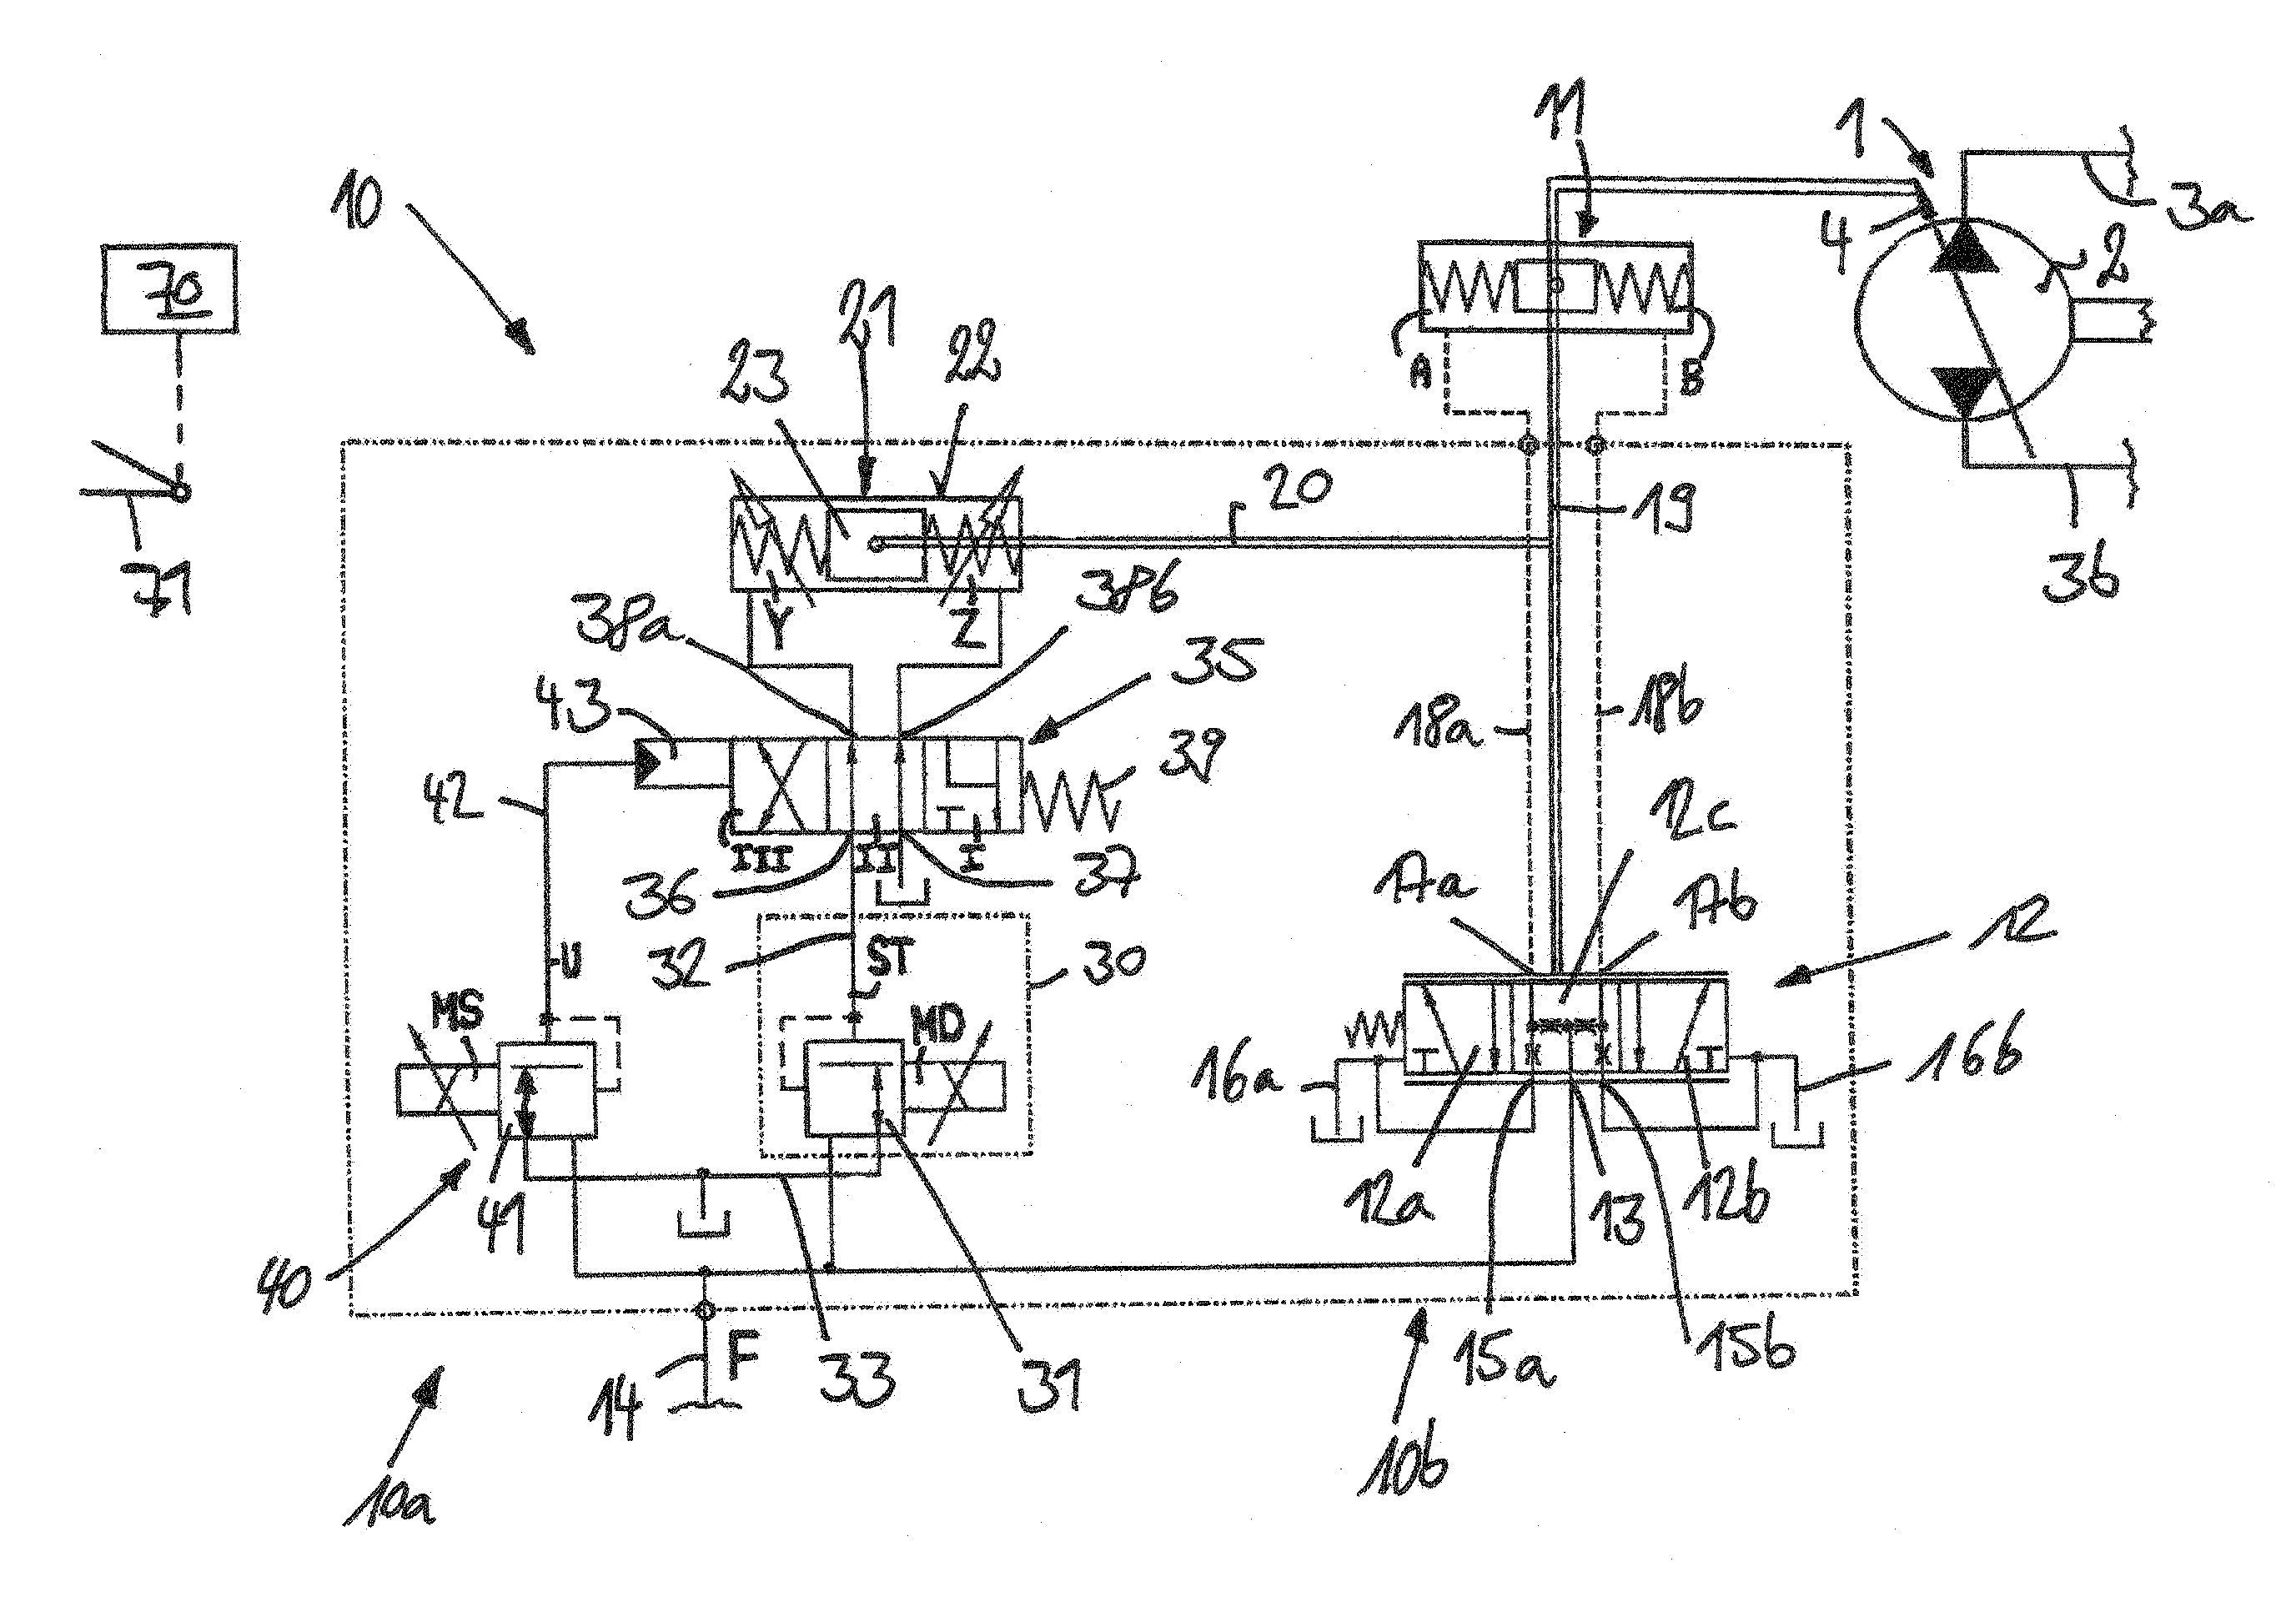 Hydrostatic Variable Displacement Pump Which Can Be Set In Either Direction Of Displacement